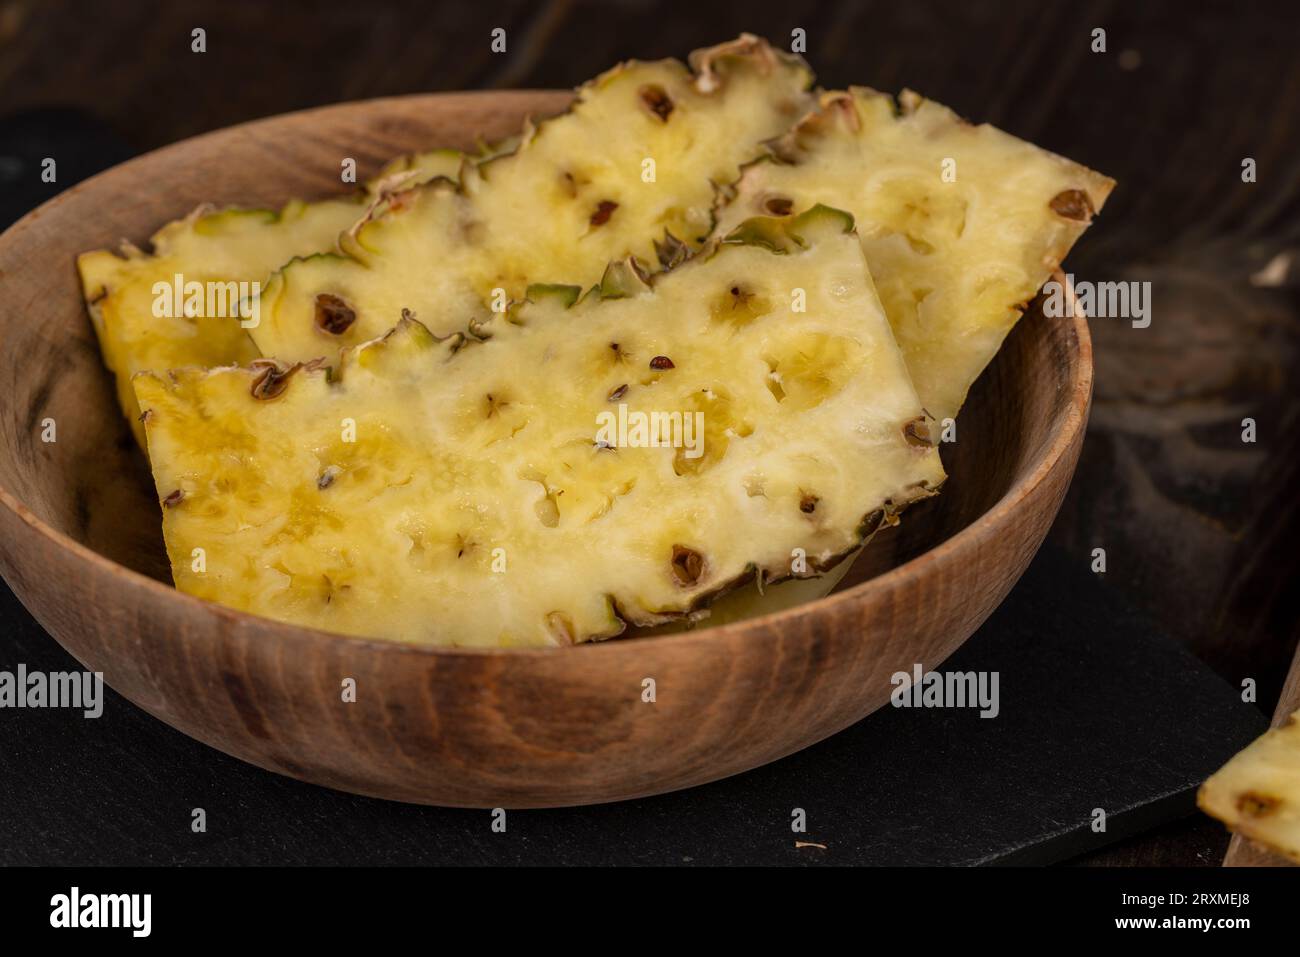 ripe pineapple of yellow-orange color cut into a large number of pieces, preparation of ripe peeled pineapple Stock Photo